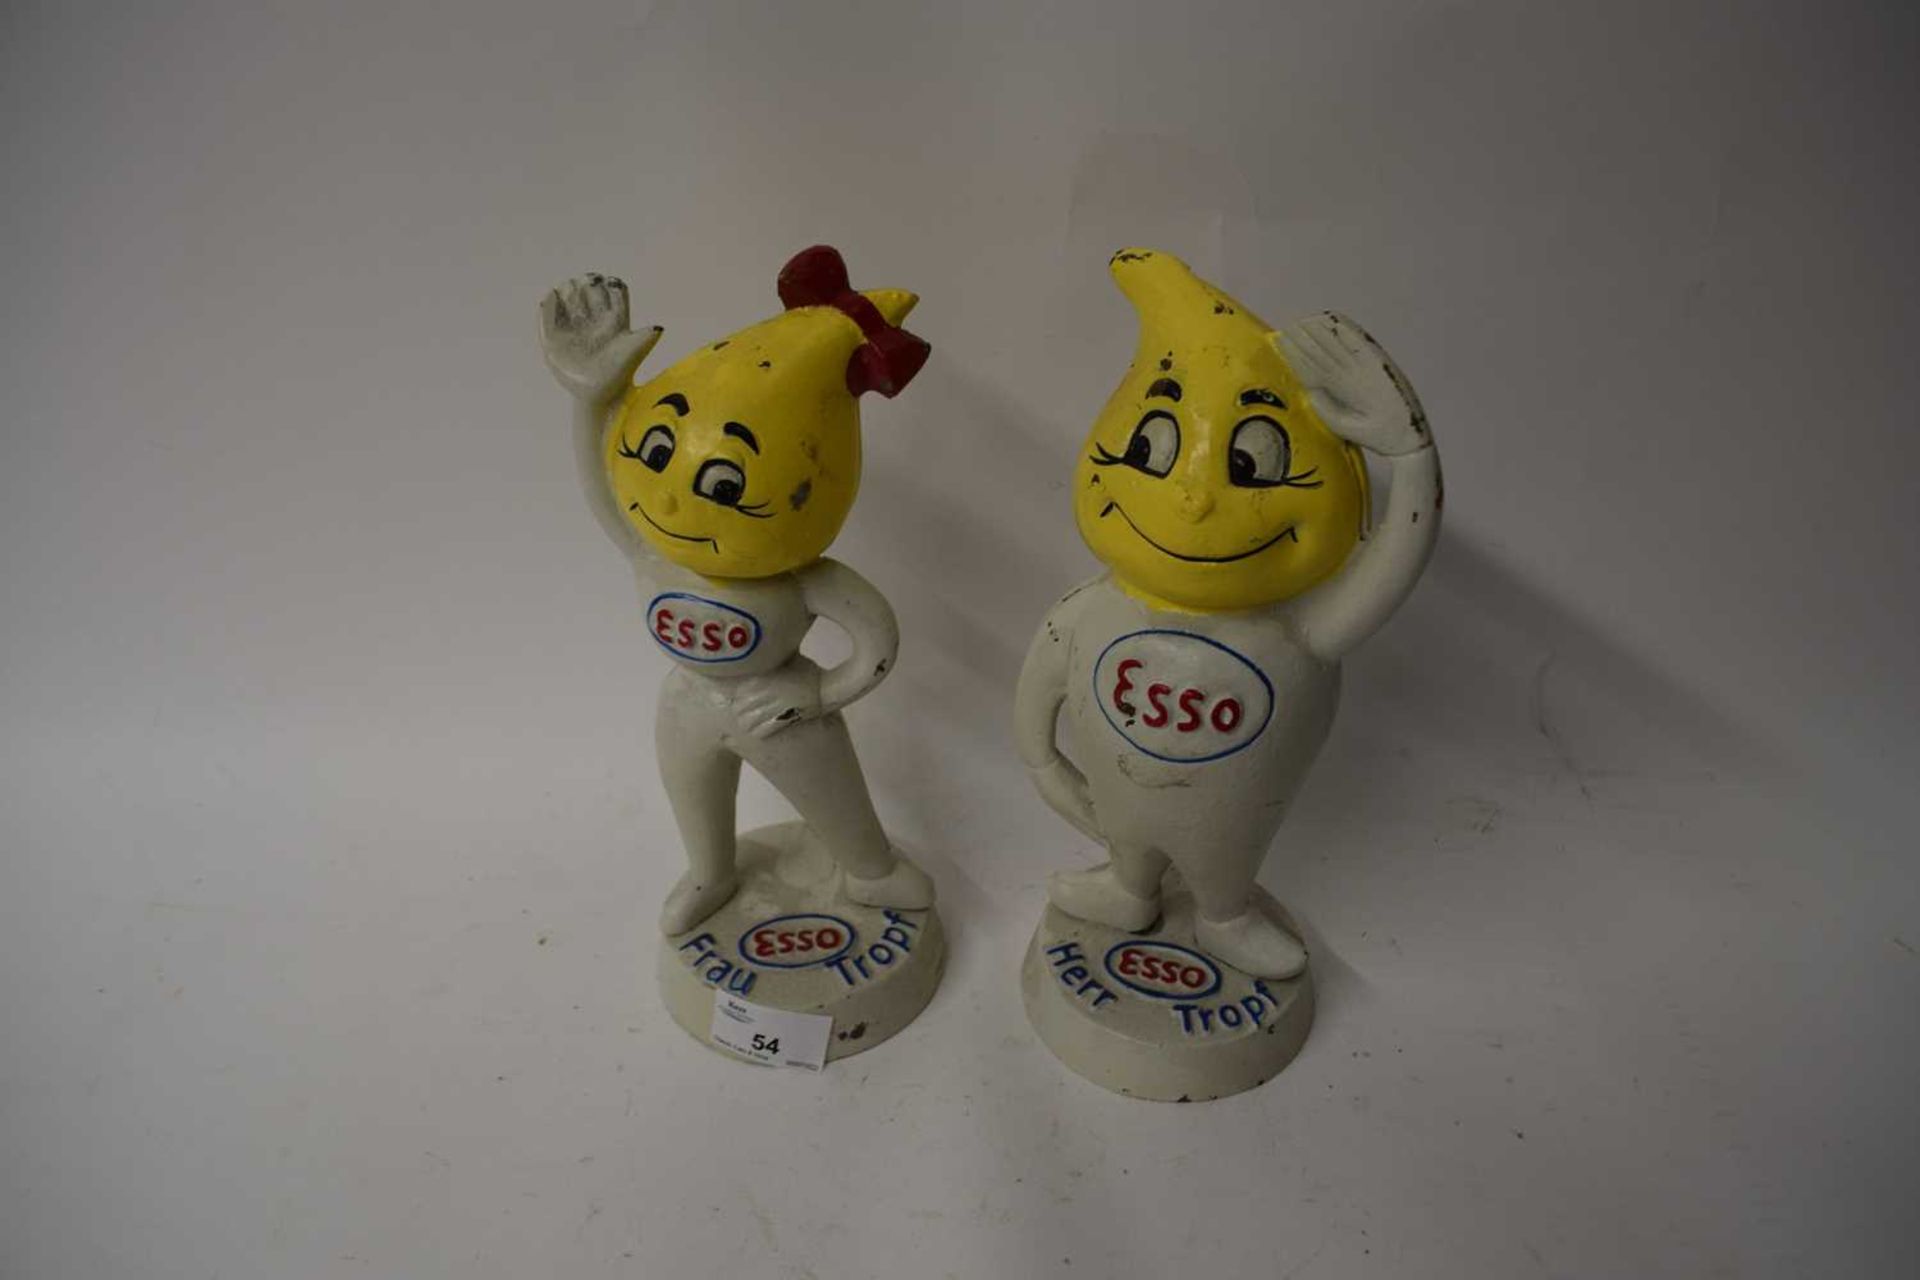 Pair of cast iron Esso advertising figures, Frau Trops and Herr Trops